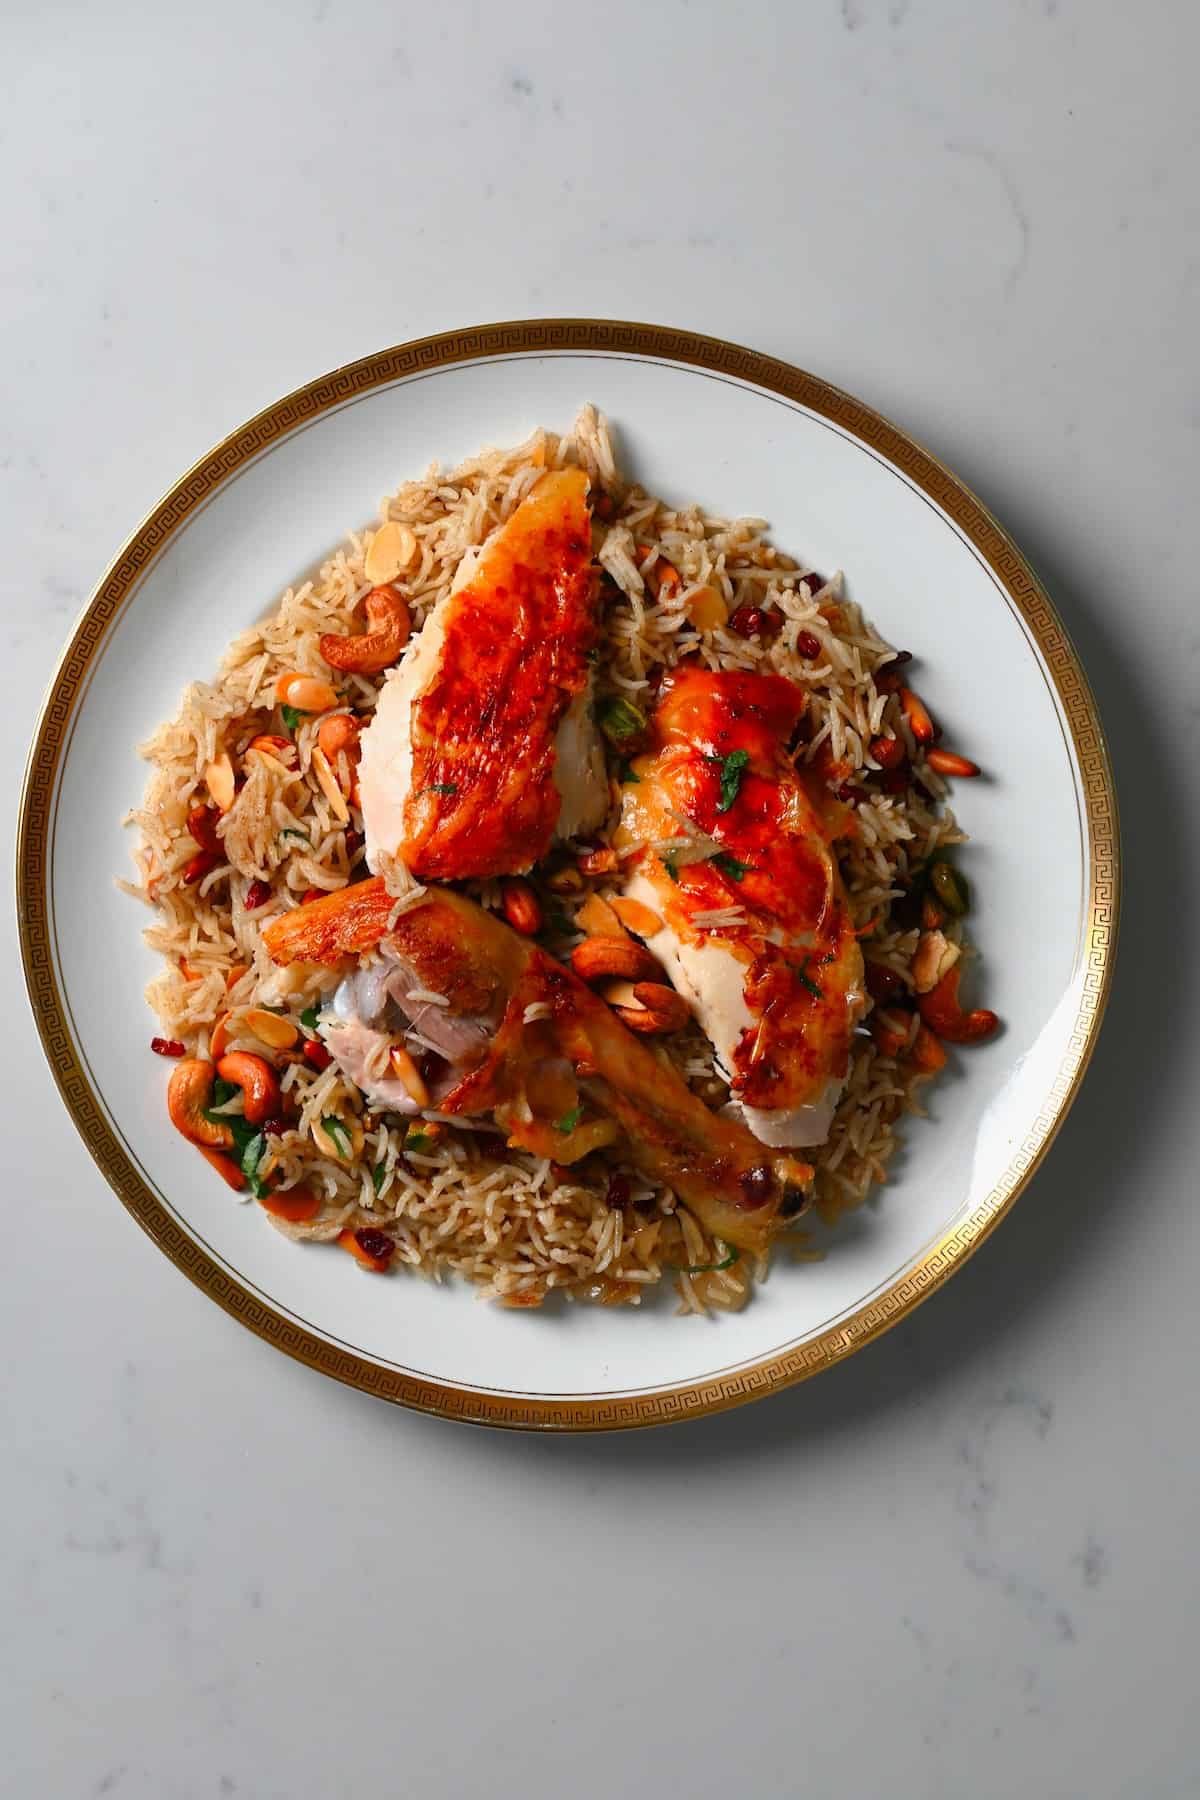 A serving of rice and roasted chicken